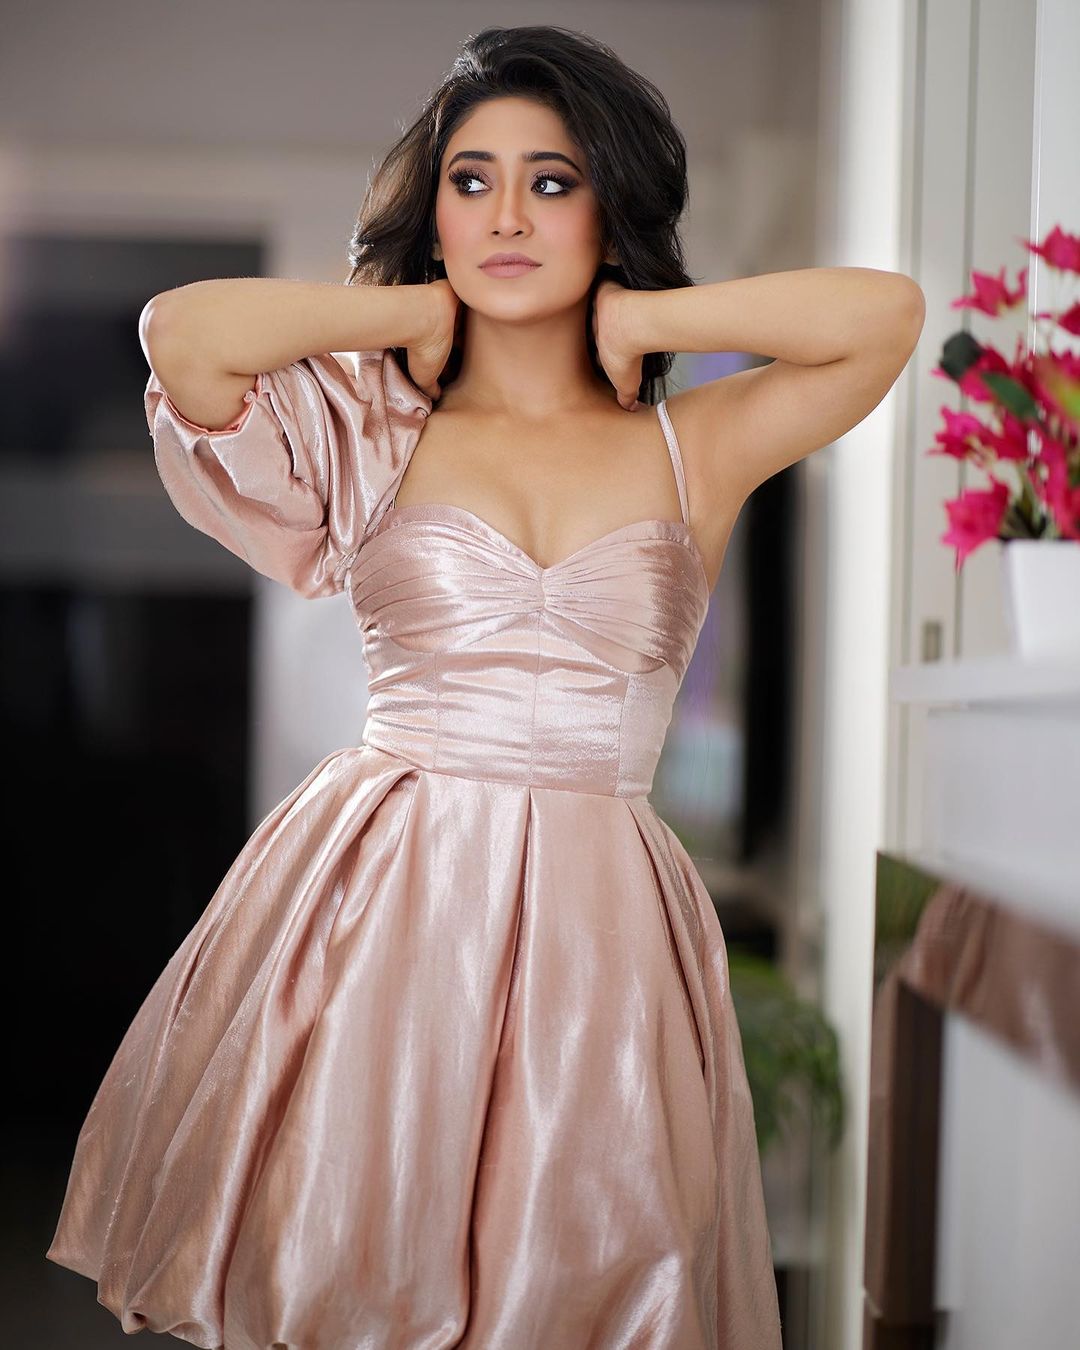 Shivangi Joshi ups her ethnic glam with these trendy blouses | Times of  India